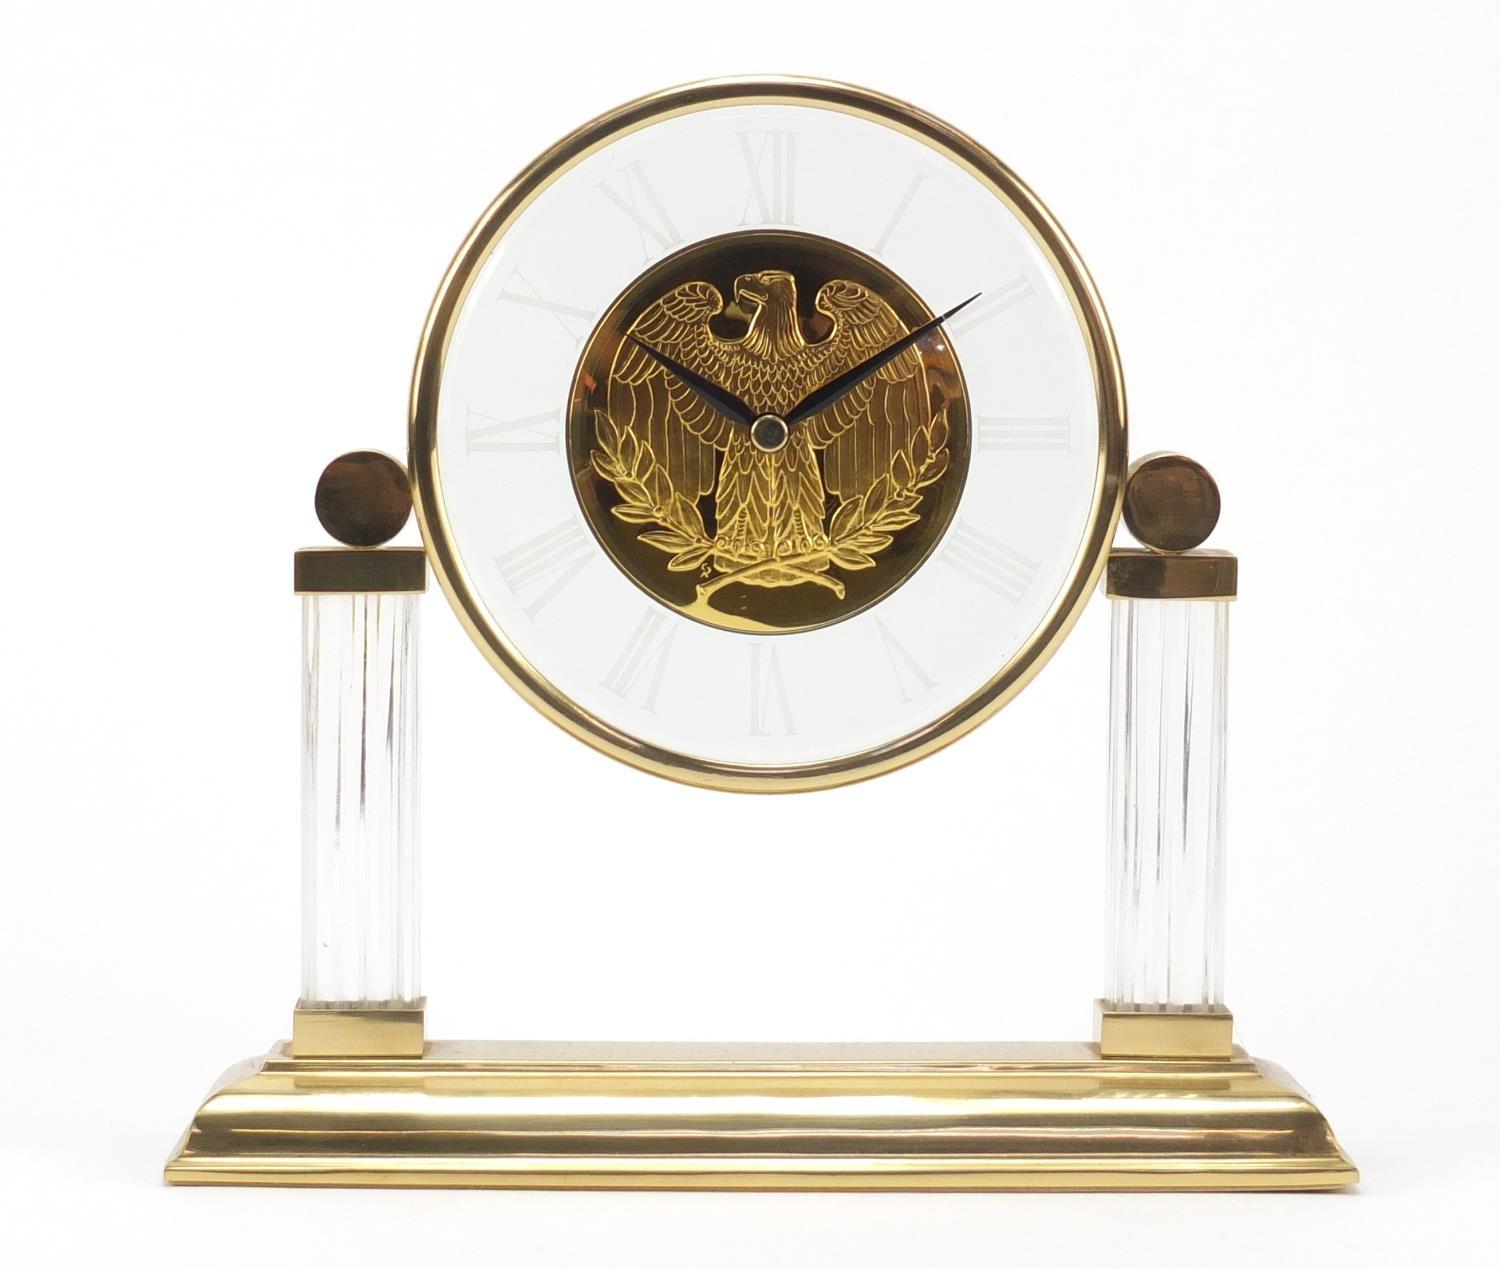 Franklin Mint golden eagle commemorative clock by Gilroy Roberts, 21cm high : For Further